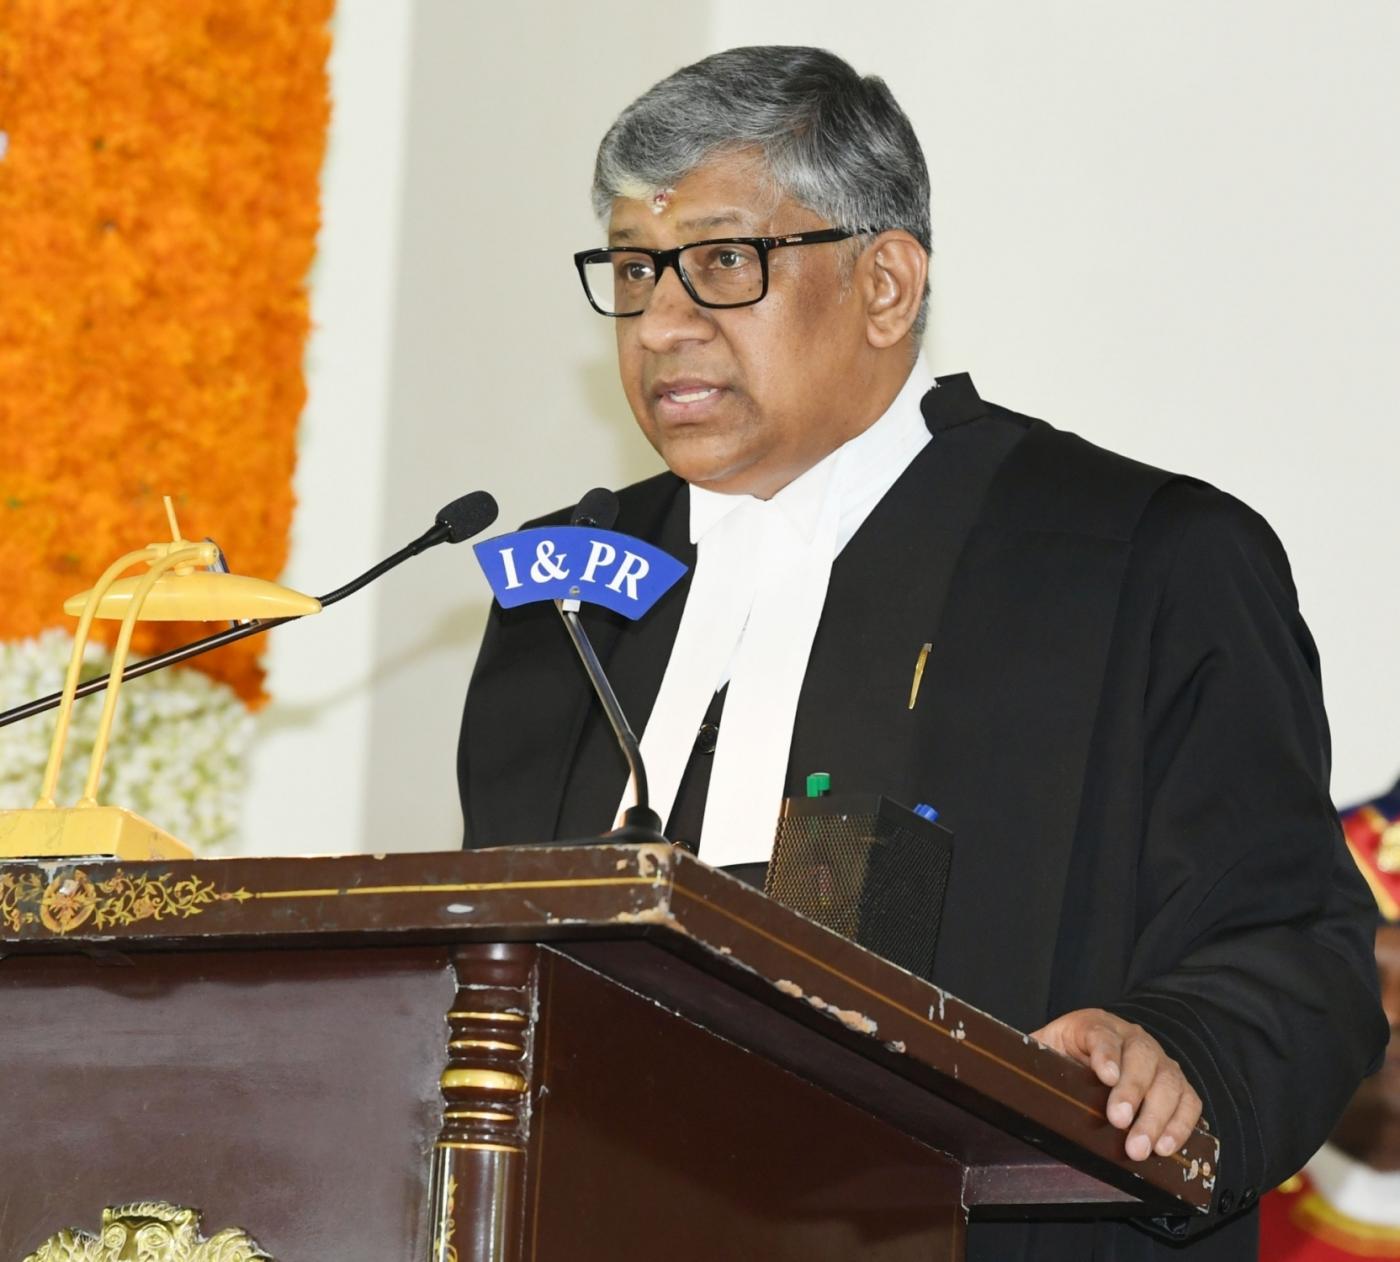 Hyderabad: Justice Thottathil Bhaskaran Nair Radhakrishnan takes oath as the Chief Justice of Hyderabad High Court for the States of Telangana and Andhra Pradesh at a swearing-in ceremony, in Hyderabad on July 7, 2018. (Photo: IANS) by .